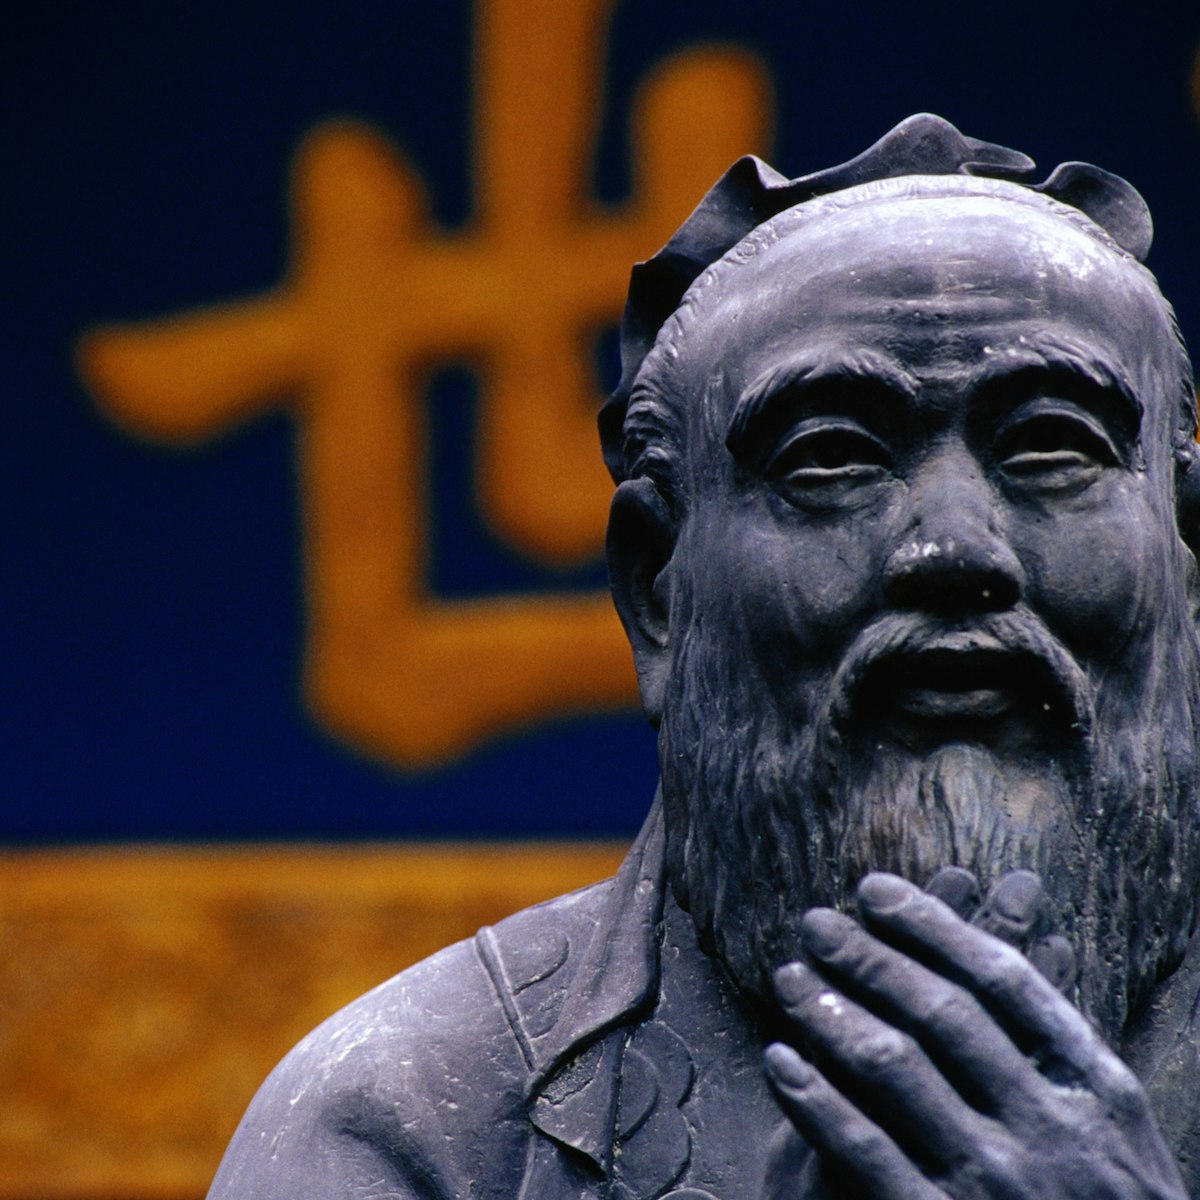 Statue detail at Confucian Temple.